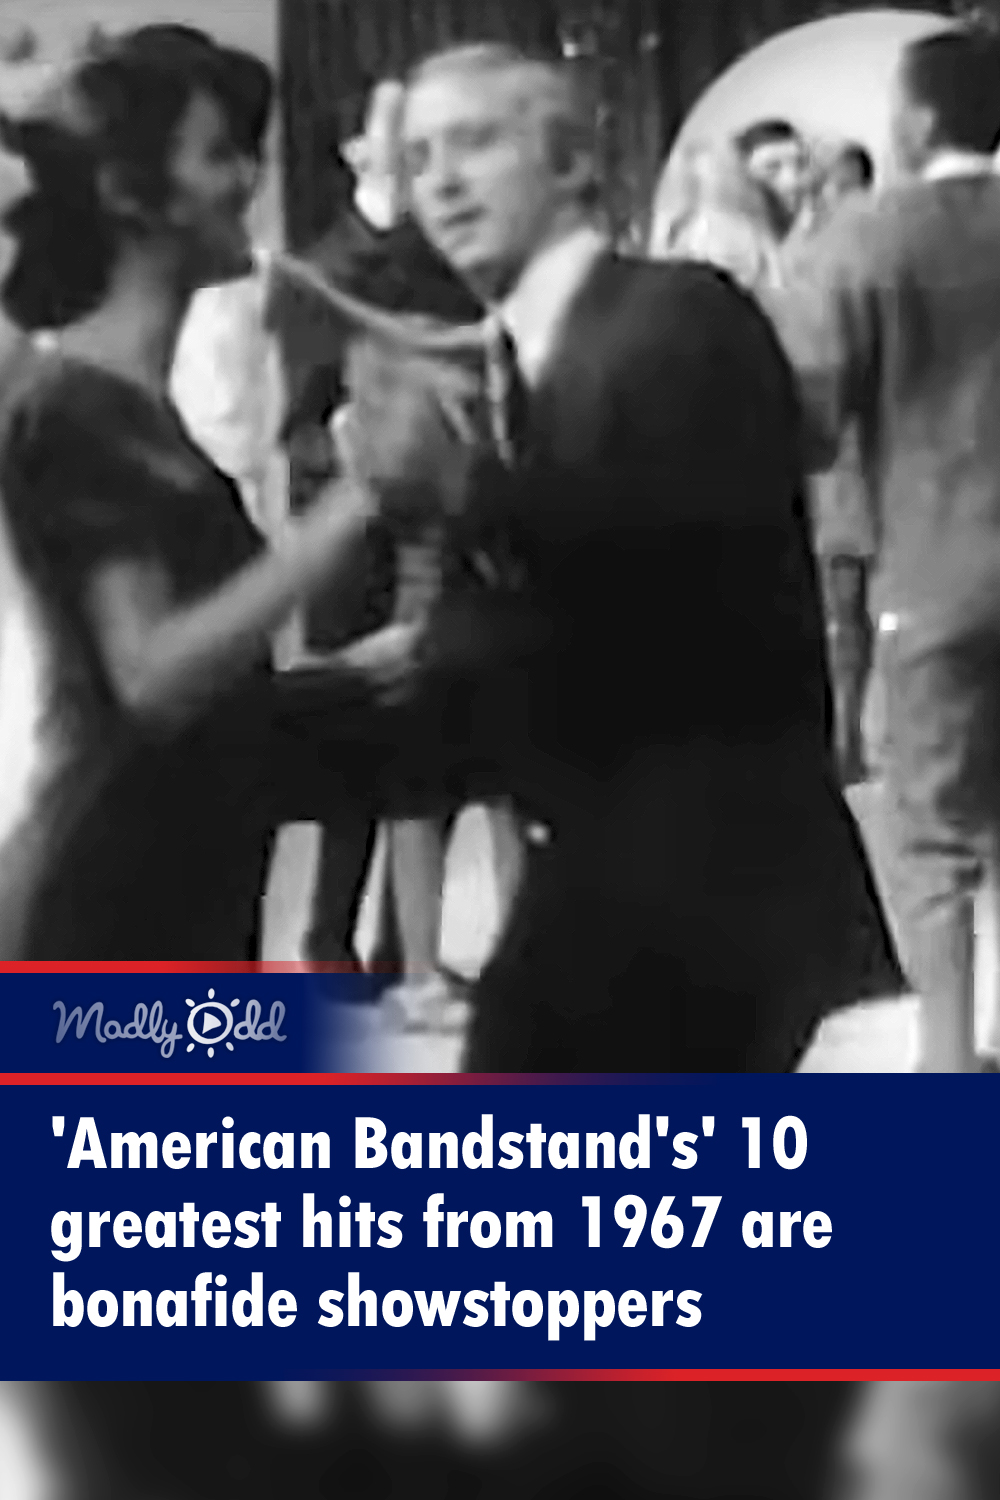 Top 10 hits of 1967 revealed on American Bandstand